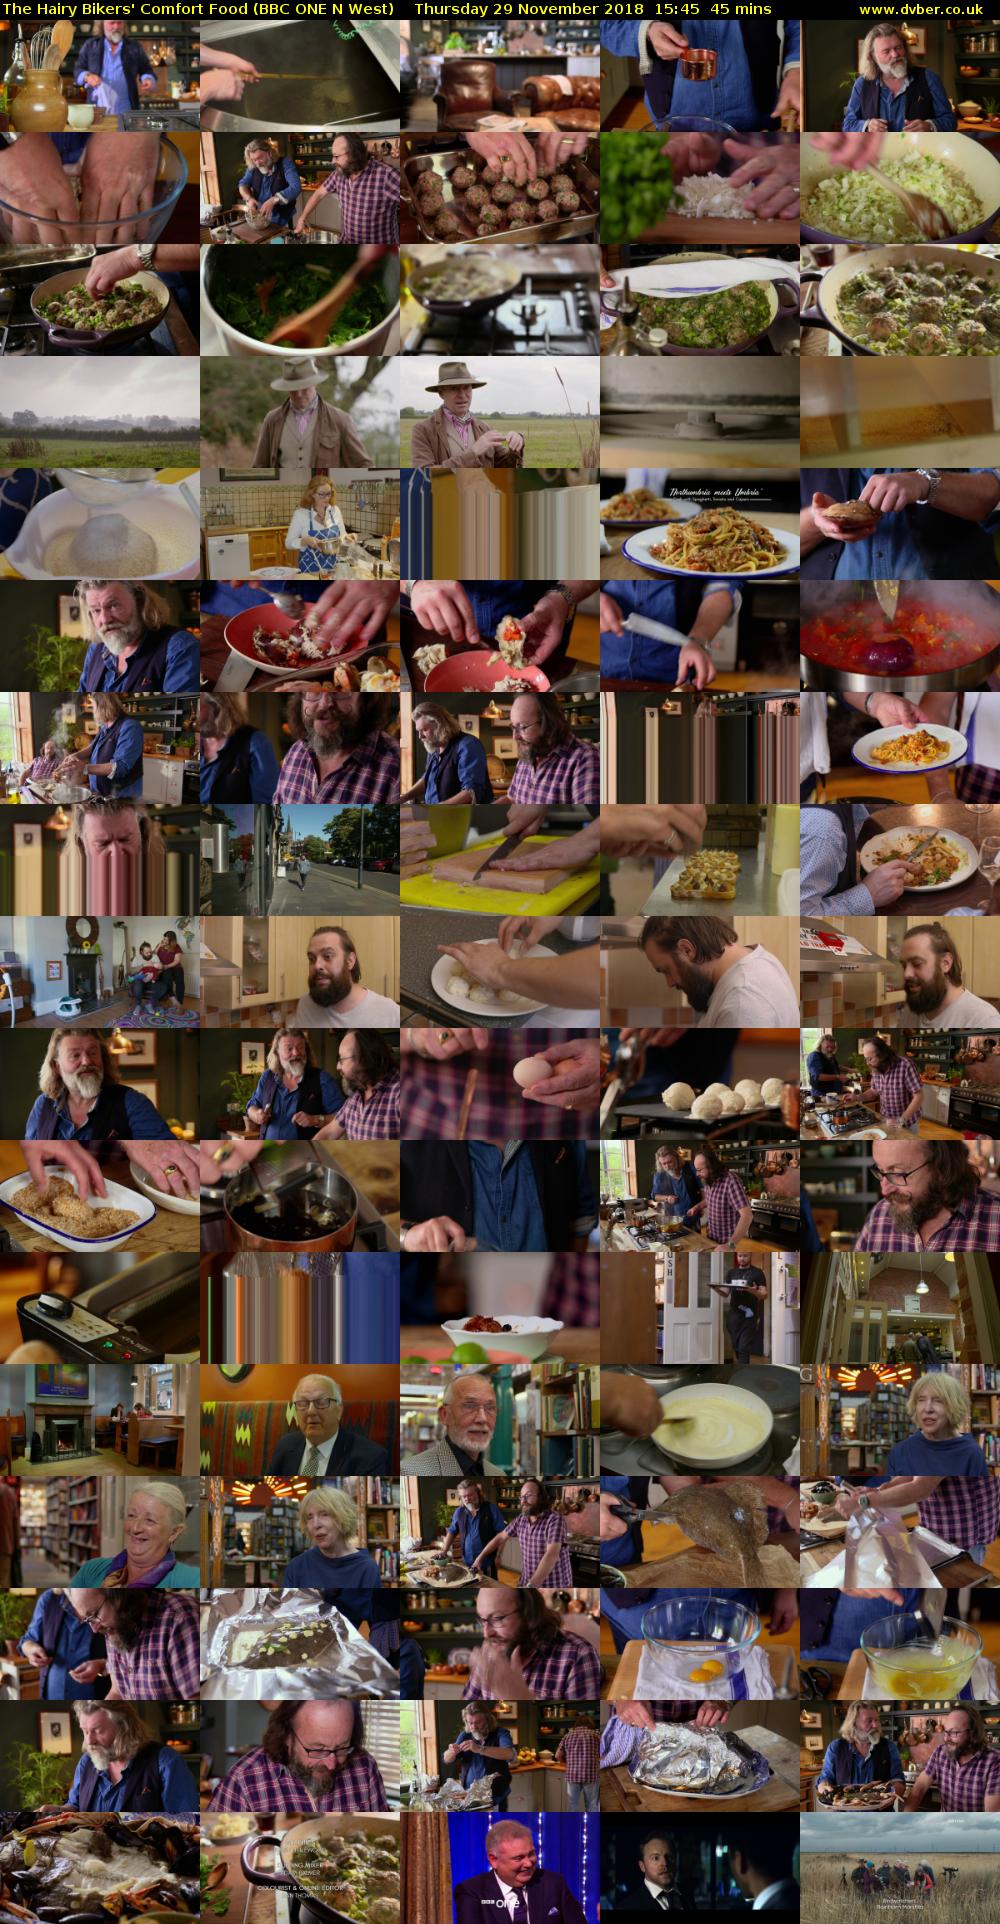 The Hairy Bikers' Comfort Food (BBC ONE N West) Thursday 29 November 2018 15:45 - 16:30